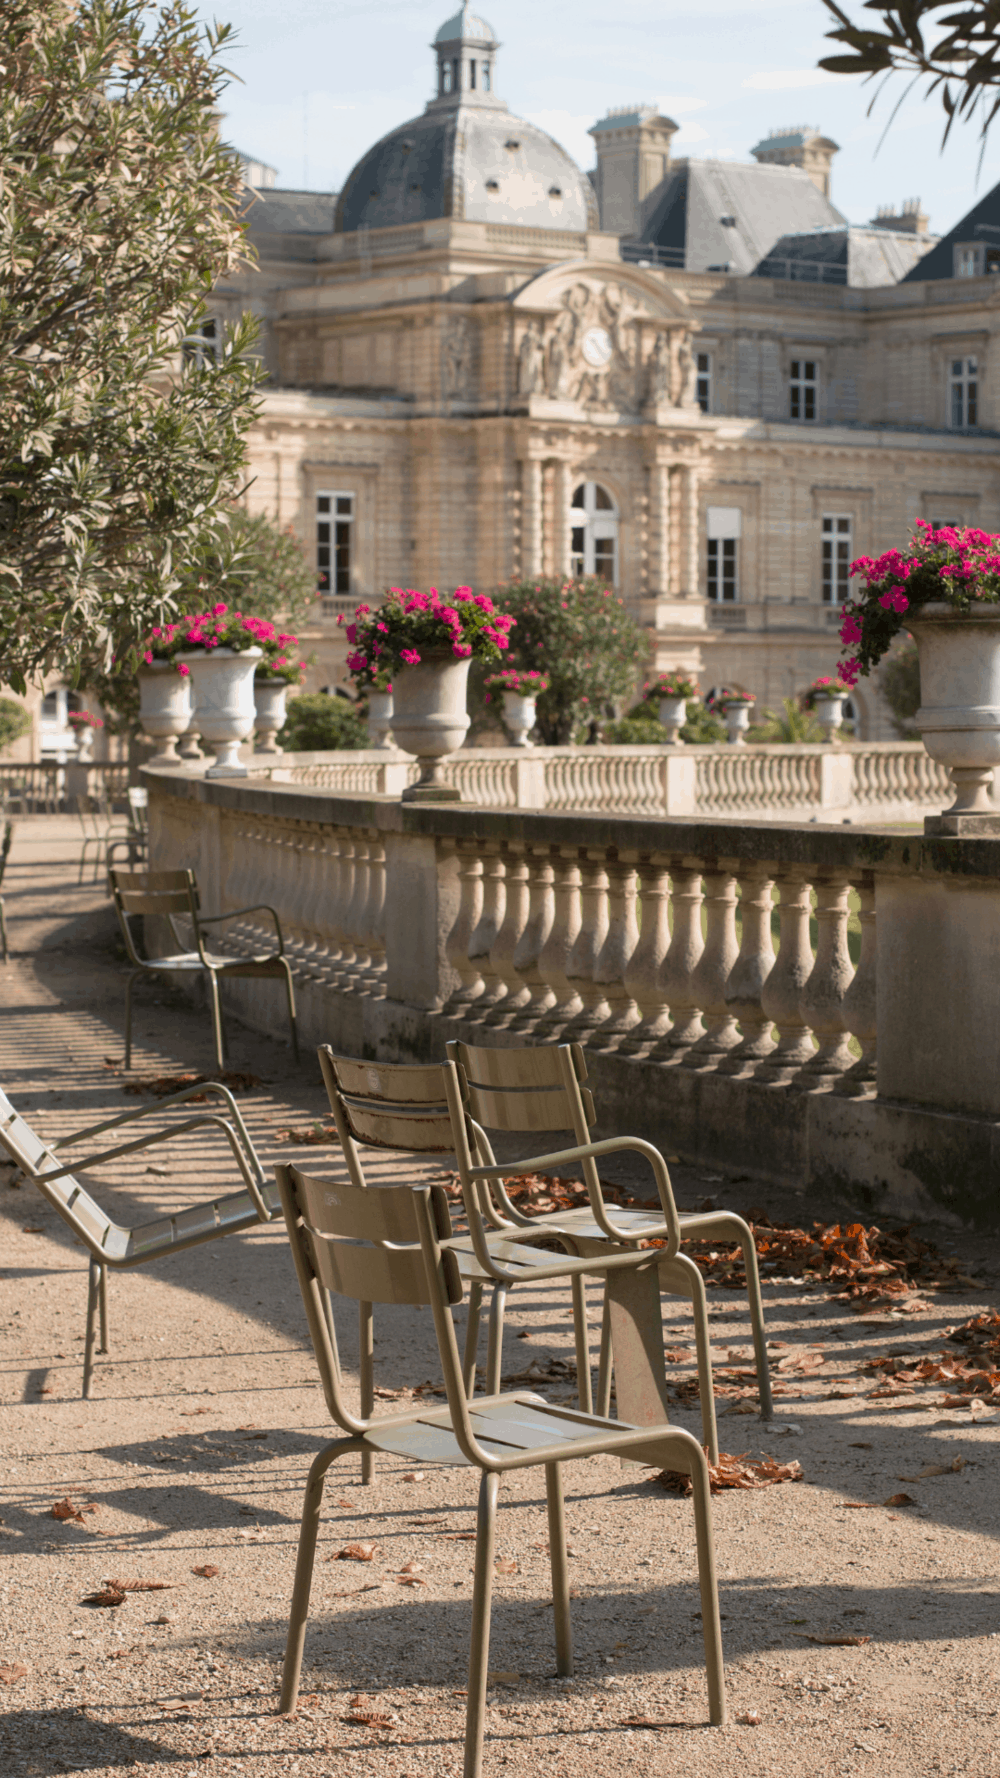 A row of chairs sitting outside in front - Paris